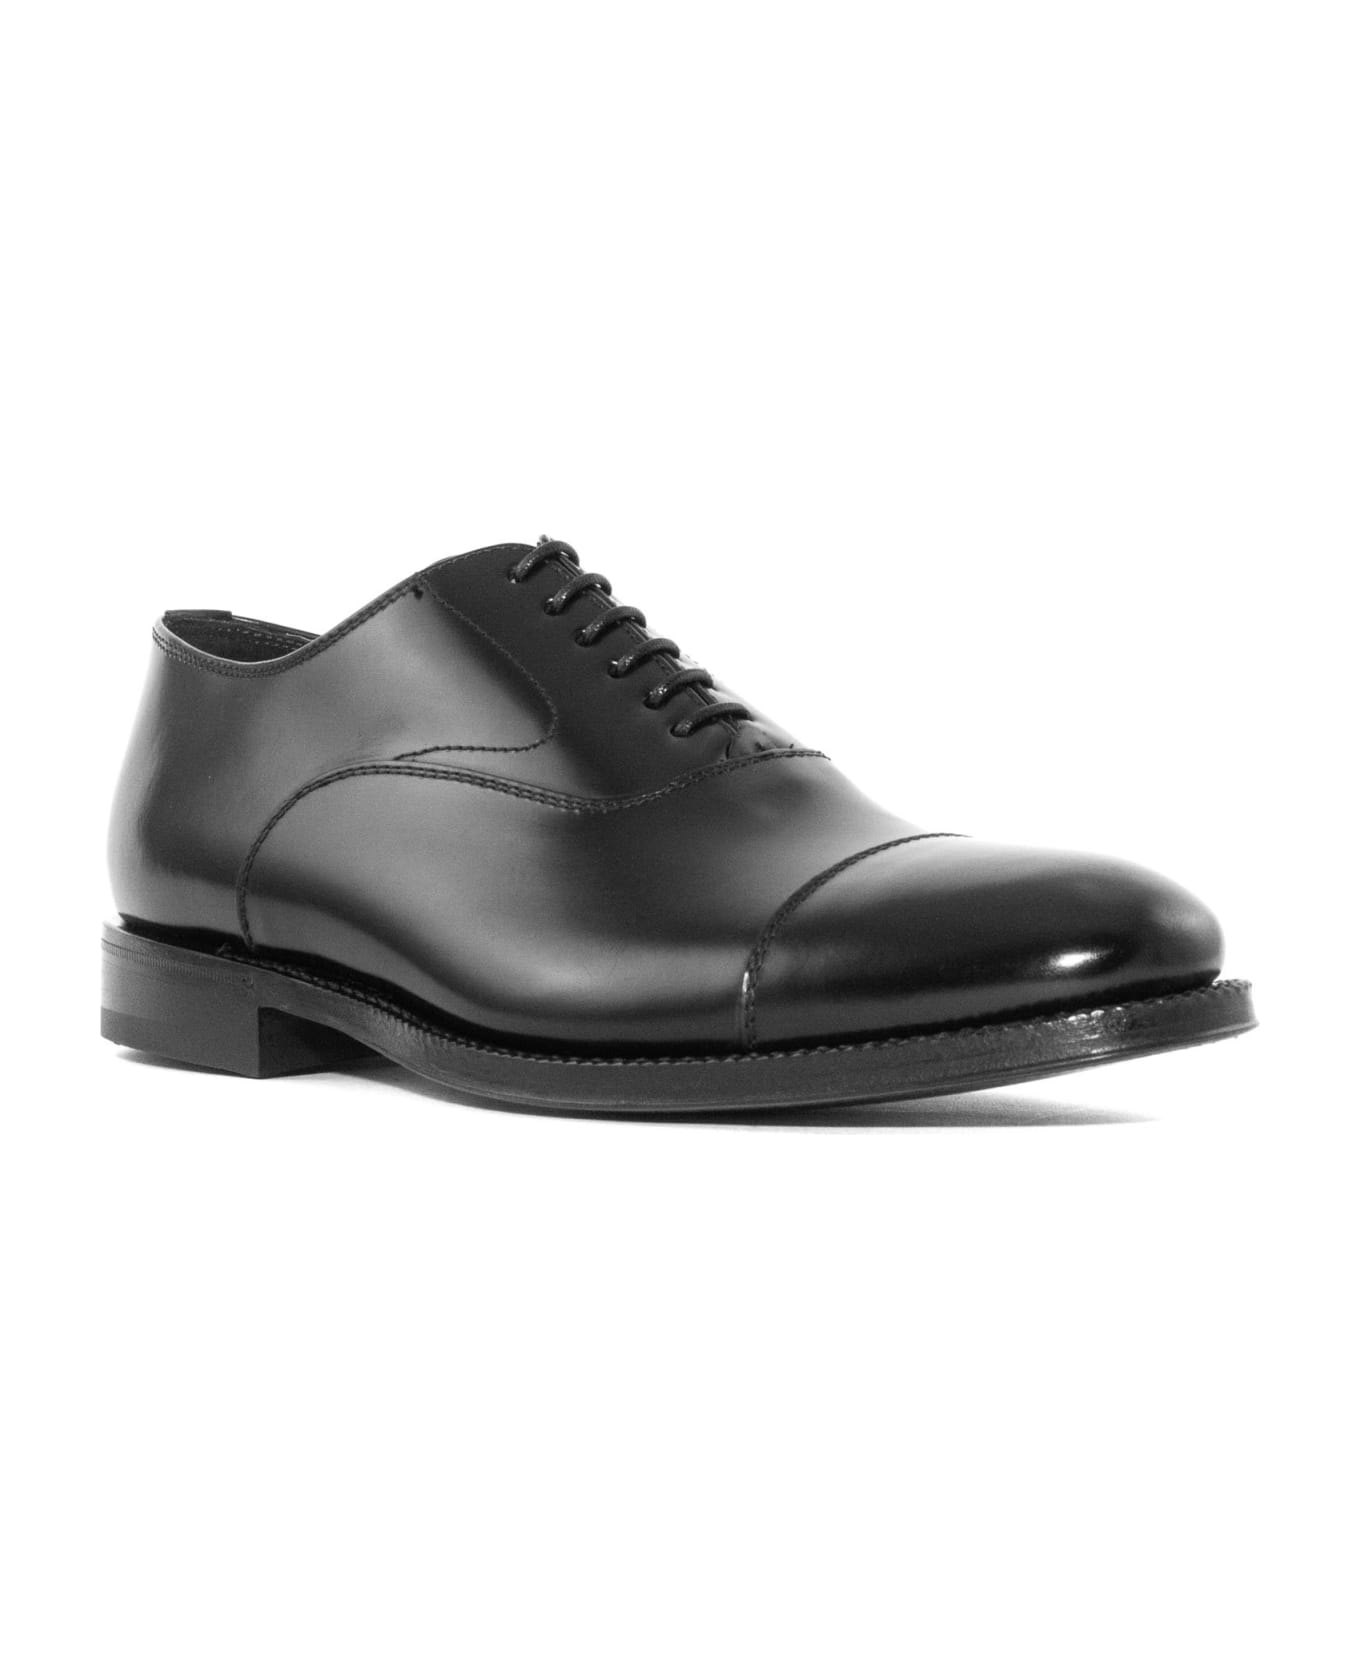 Green George Black Brushed Leather Oxford Shoes - Black ローファー＆デッキシューズ